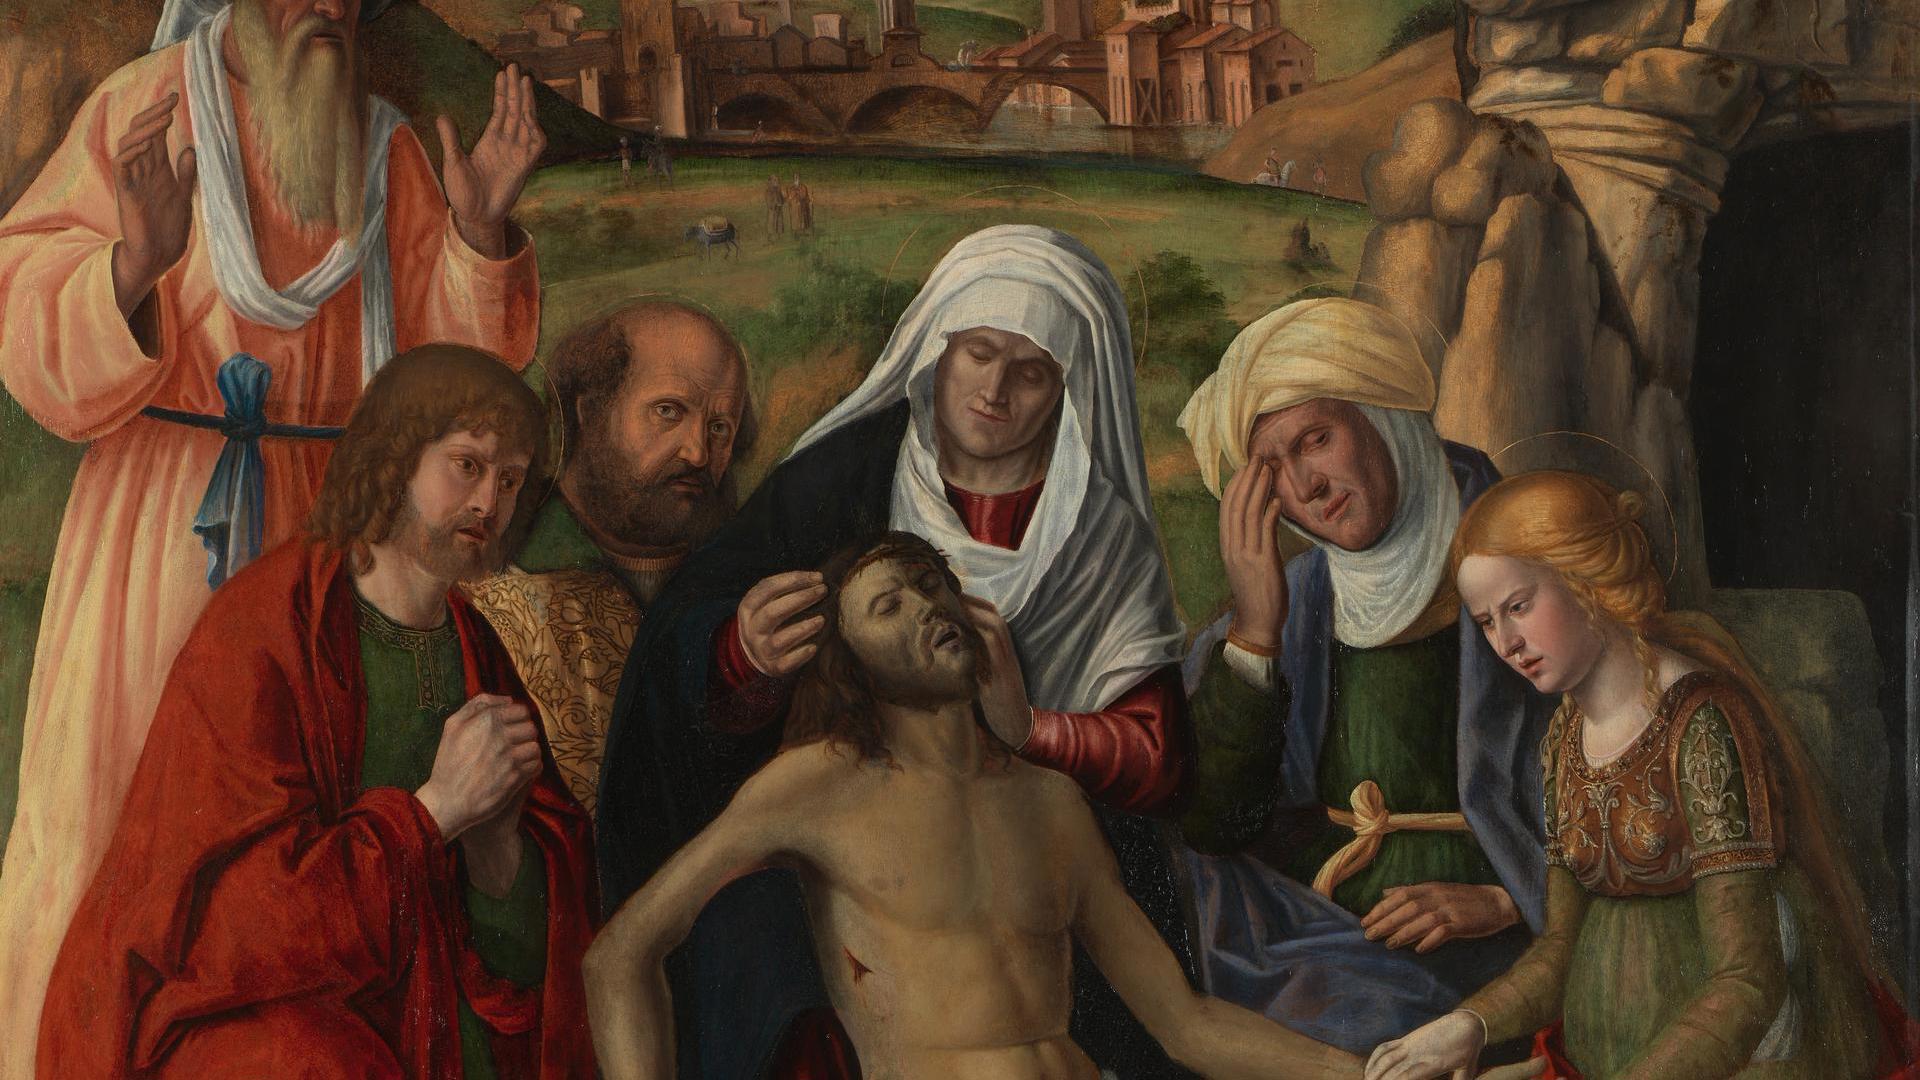 The Entombment by Andrea Busati